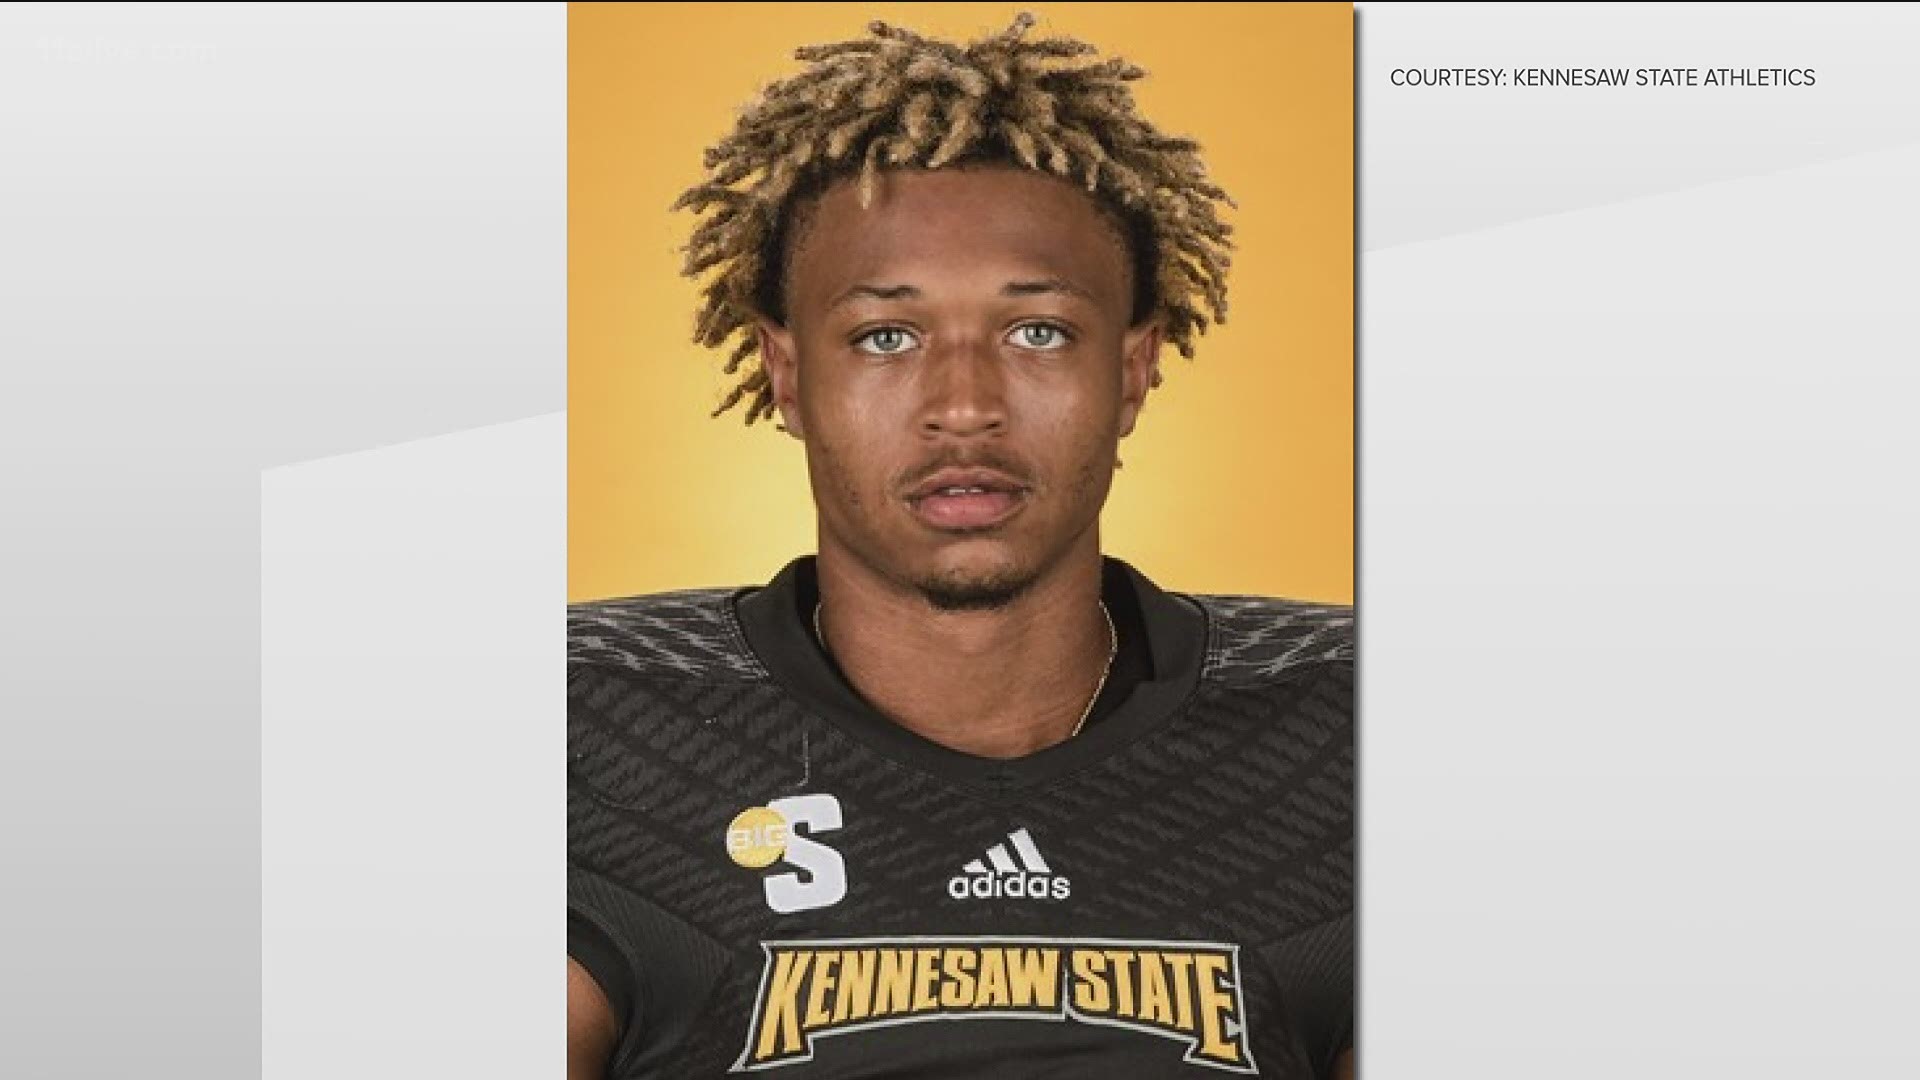 There is now a $10,000 dollar reward for information leading to an arrest... after a Kennesaw State Football player was shot and killed in Florida.